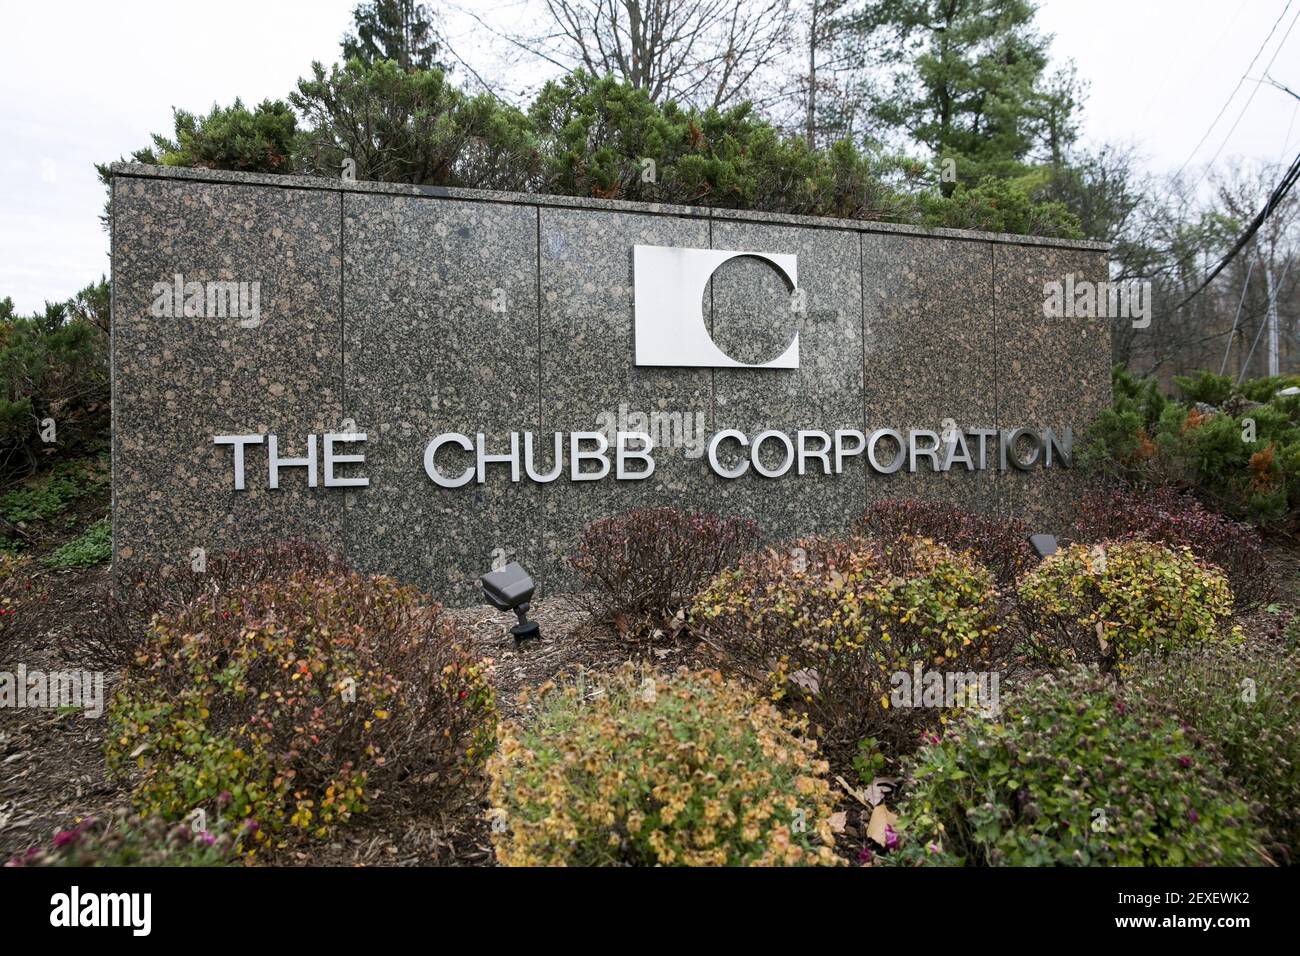 A logo sign outside of the headquarters of the Chubb Corporation in